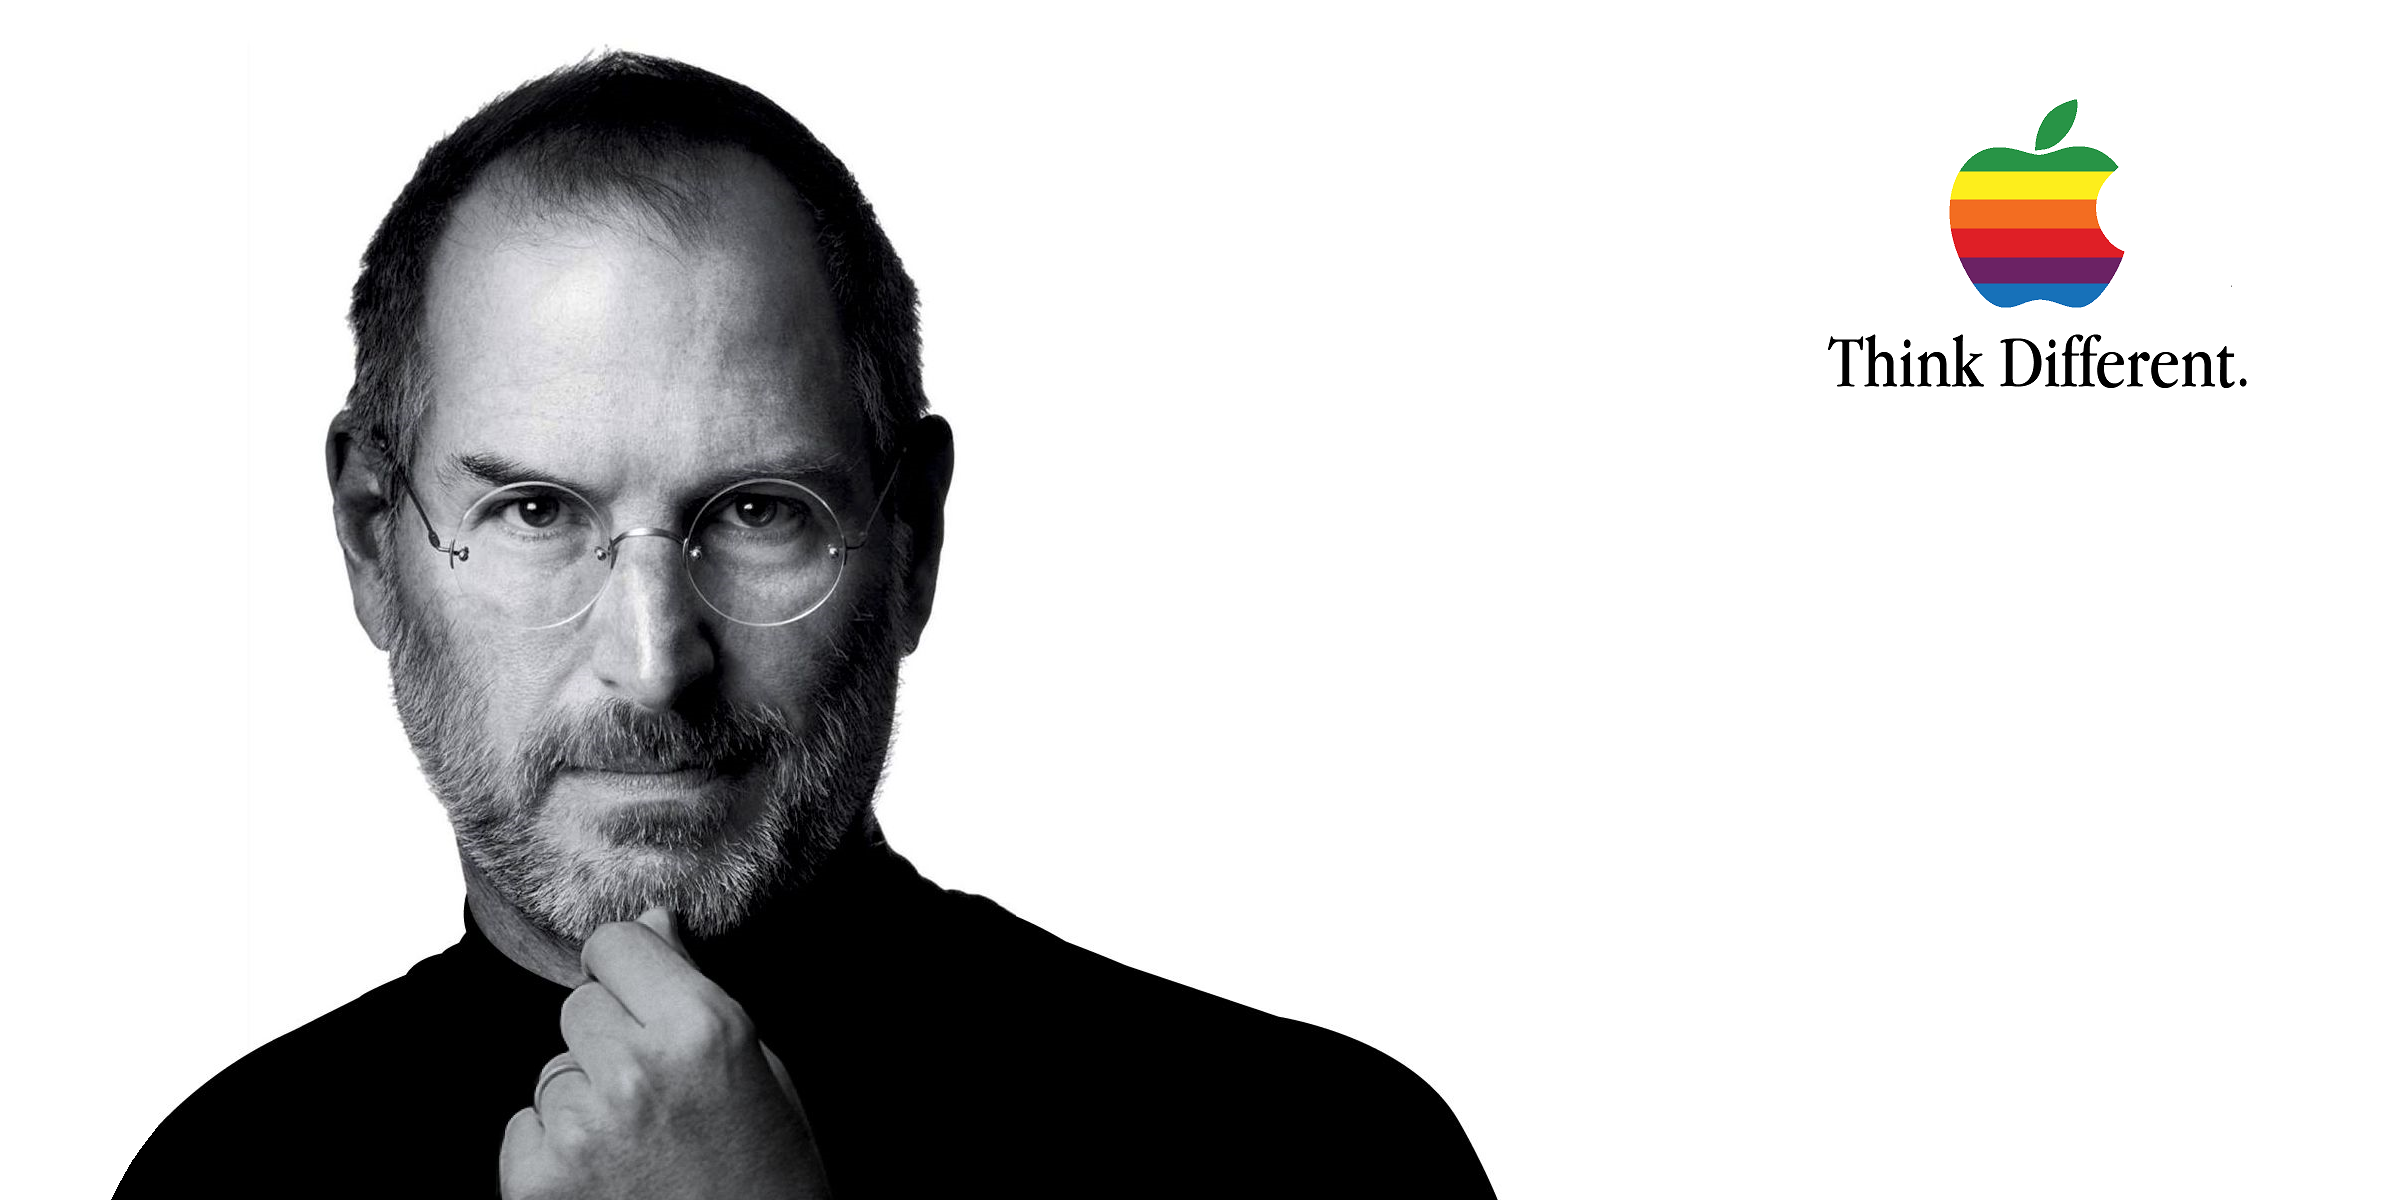 The language of a CEO, NLP analysis of Steve Jobs commencement speech